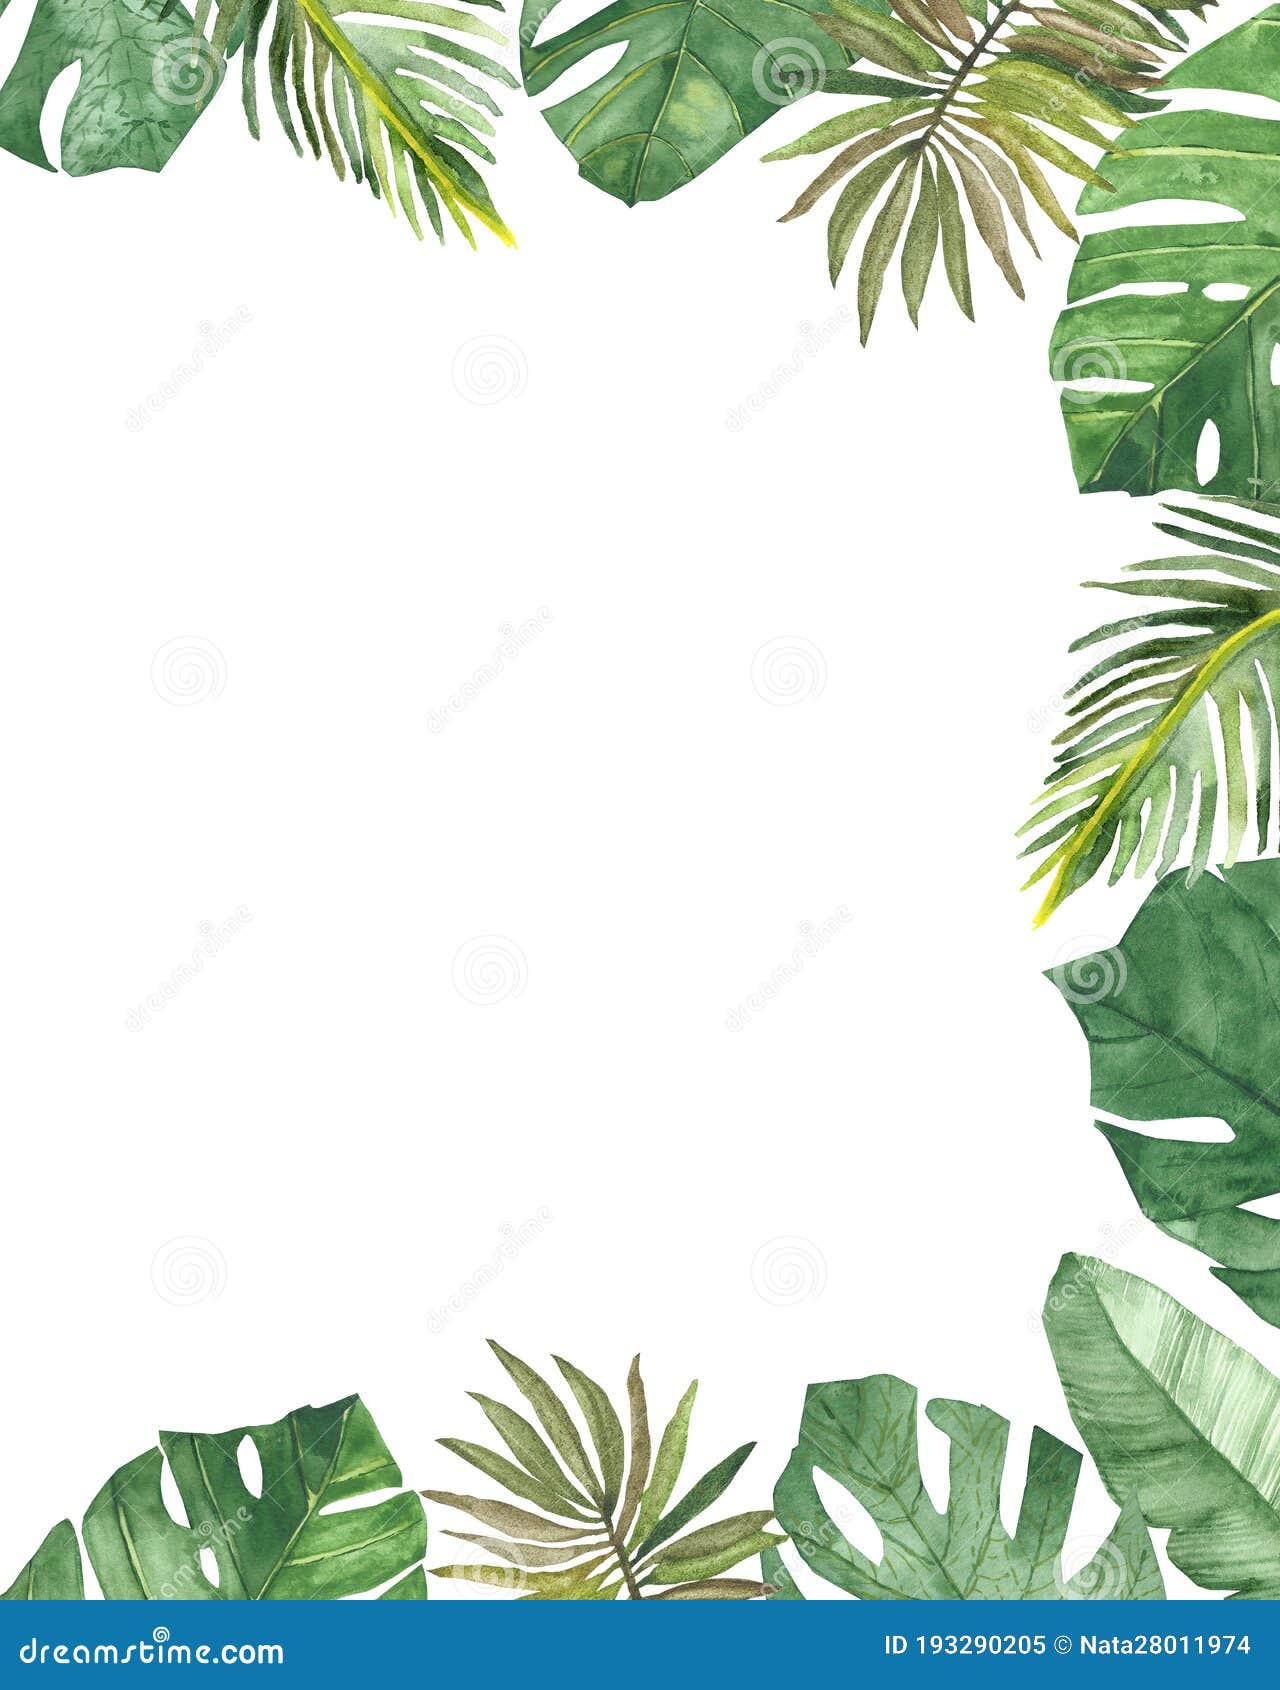 Watercolor Hand Painted Nature Tropical Border Frame Composition with ...